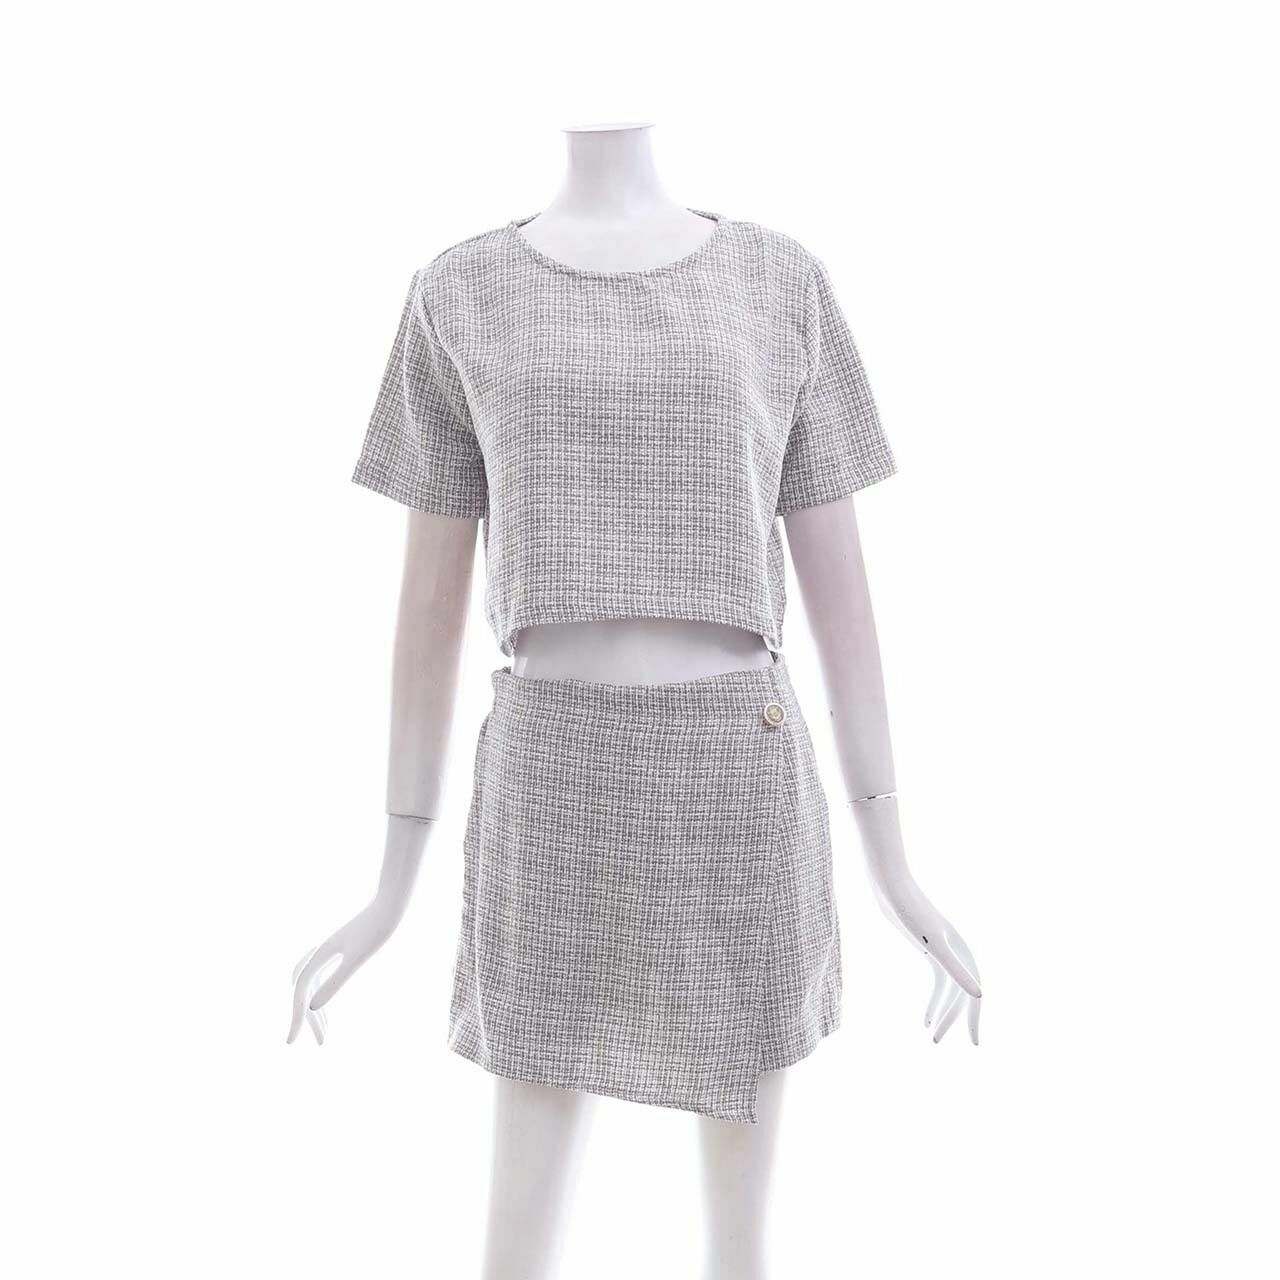 Aubrie Grey White Patterned Two Piece